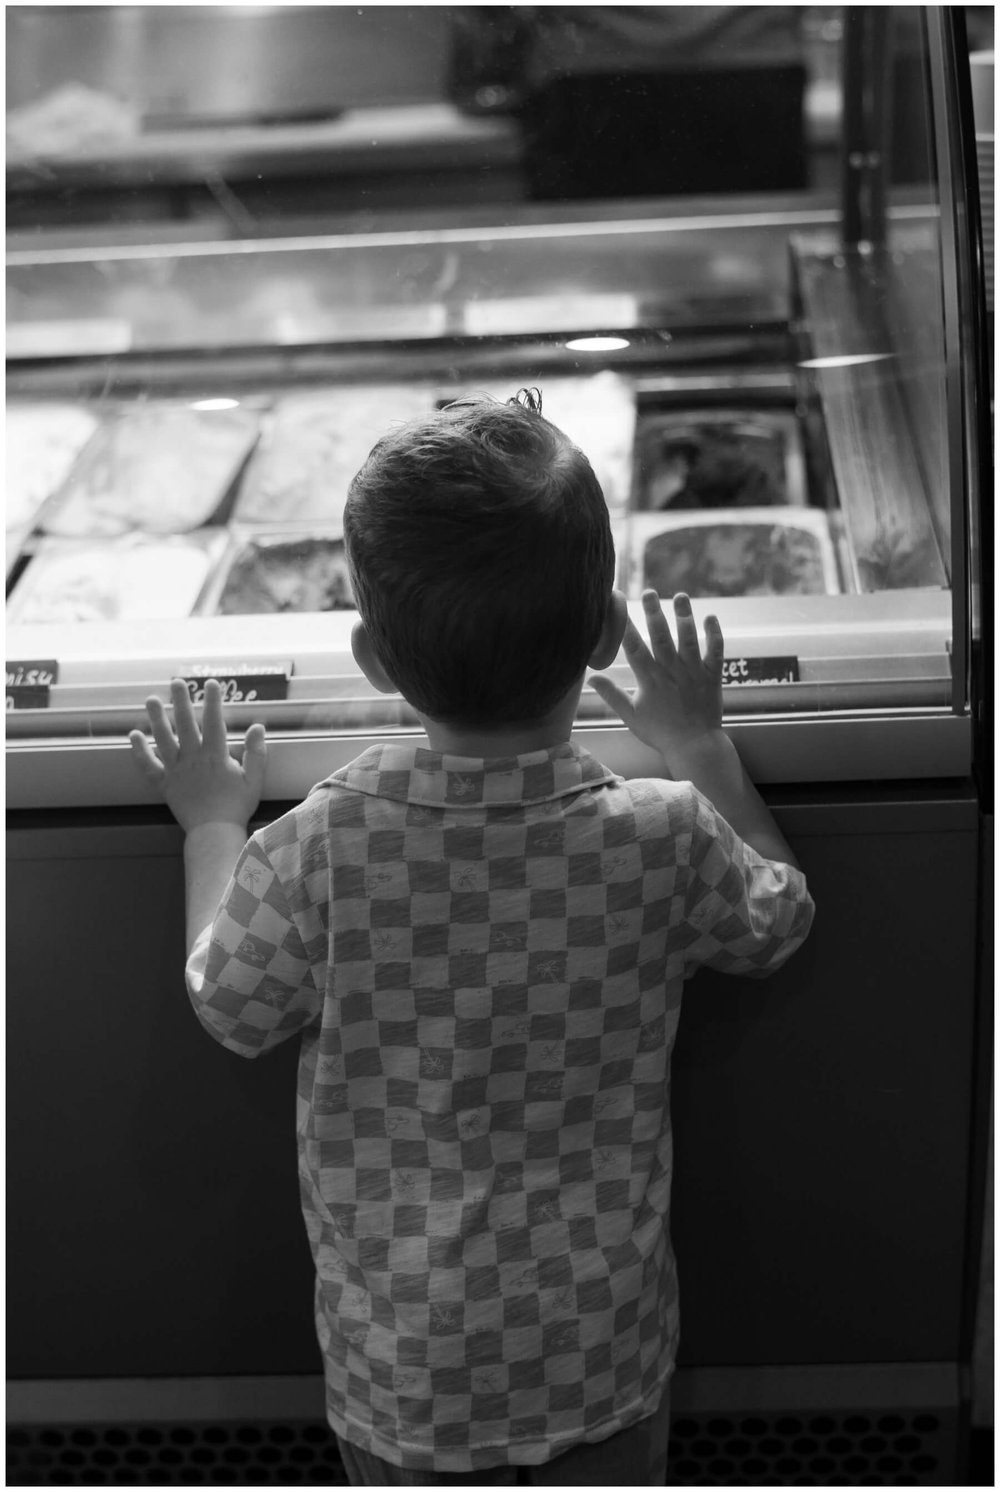 Boy standing with hands on glass looking at ice cream